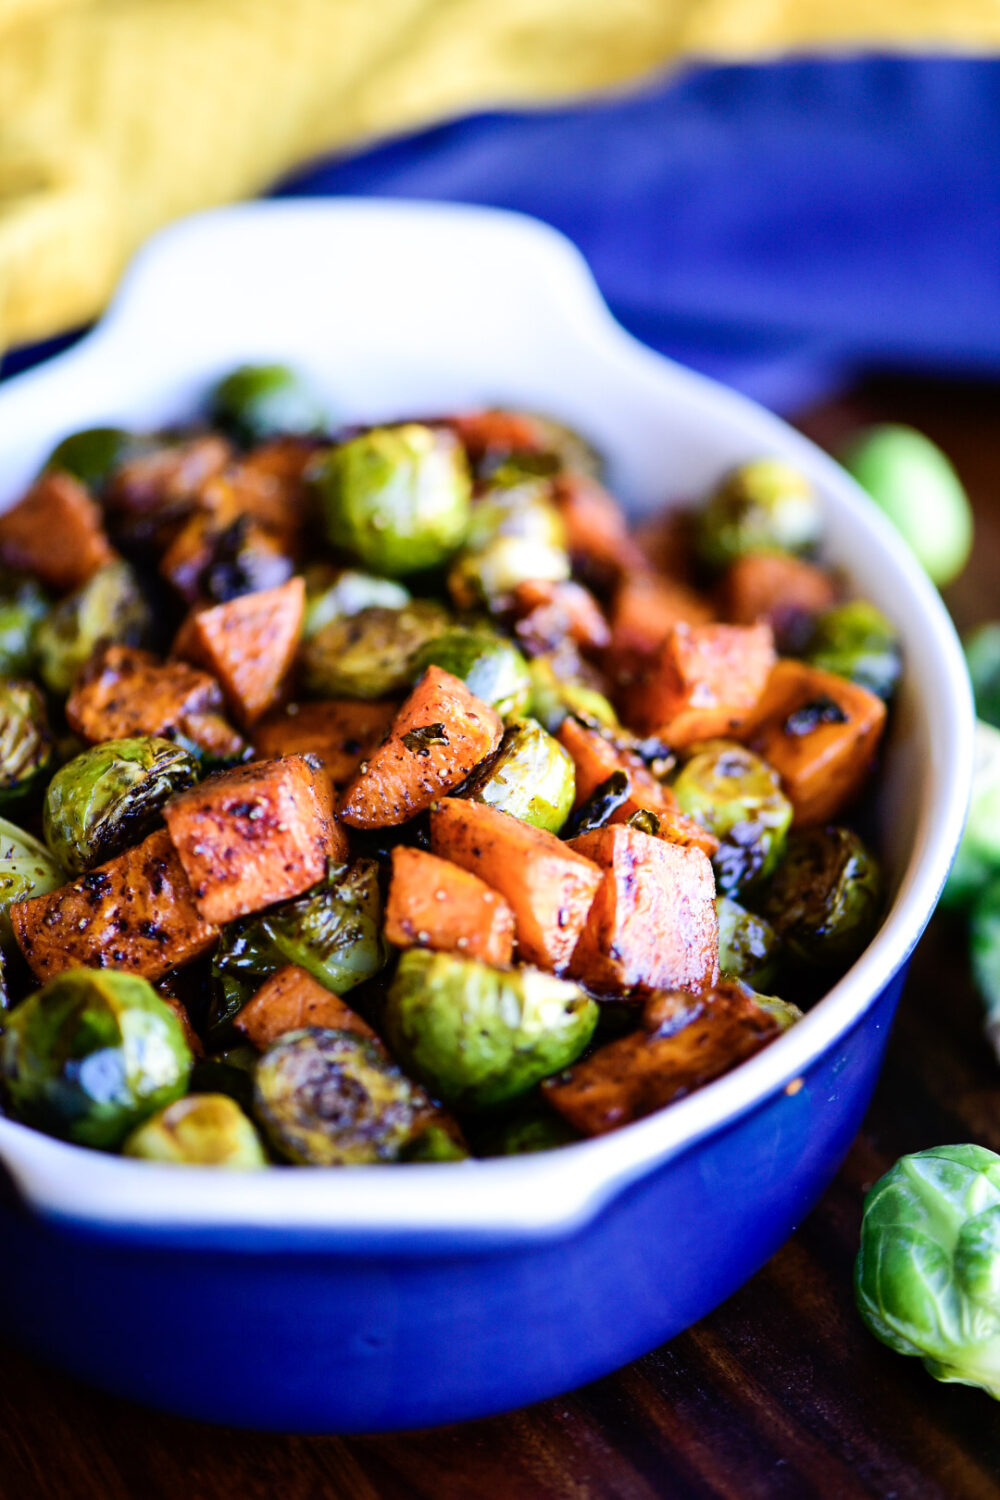 Roasted Sweet Potatoes & Brussels Sprouts | Dude That Cookz